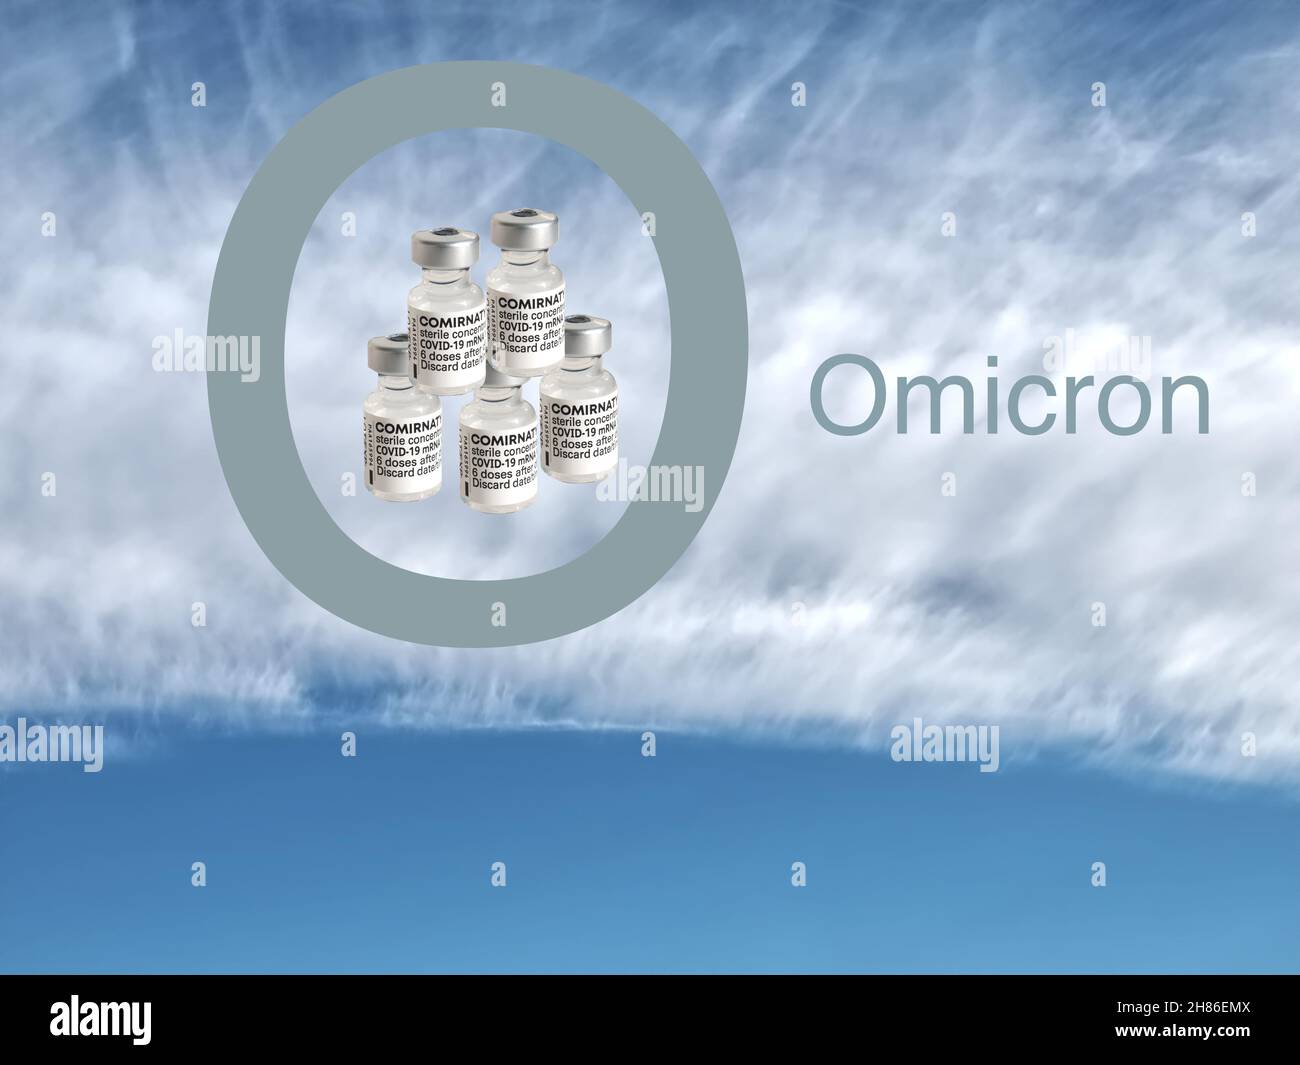 Omicron symbol with Biontech Fizer Vaccine Stock Photo